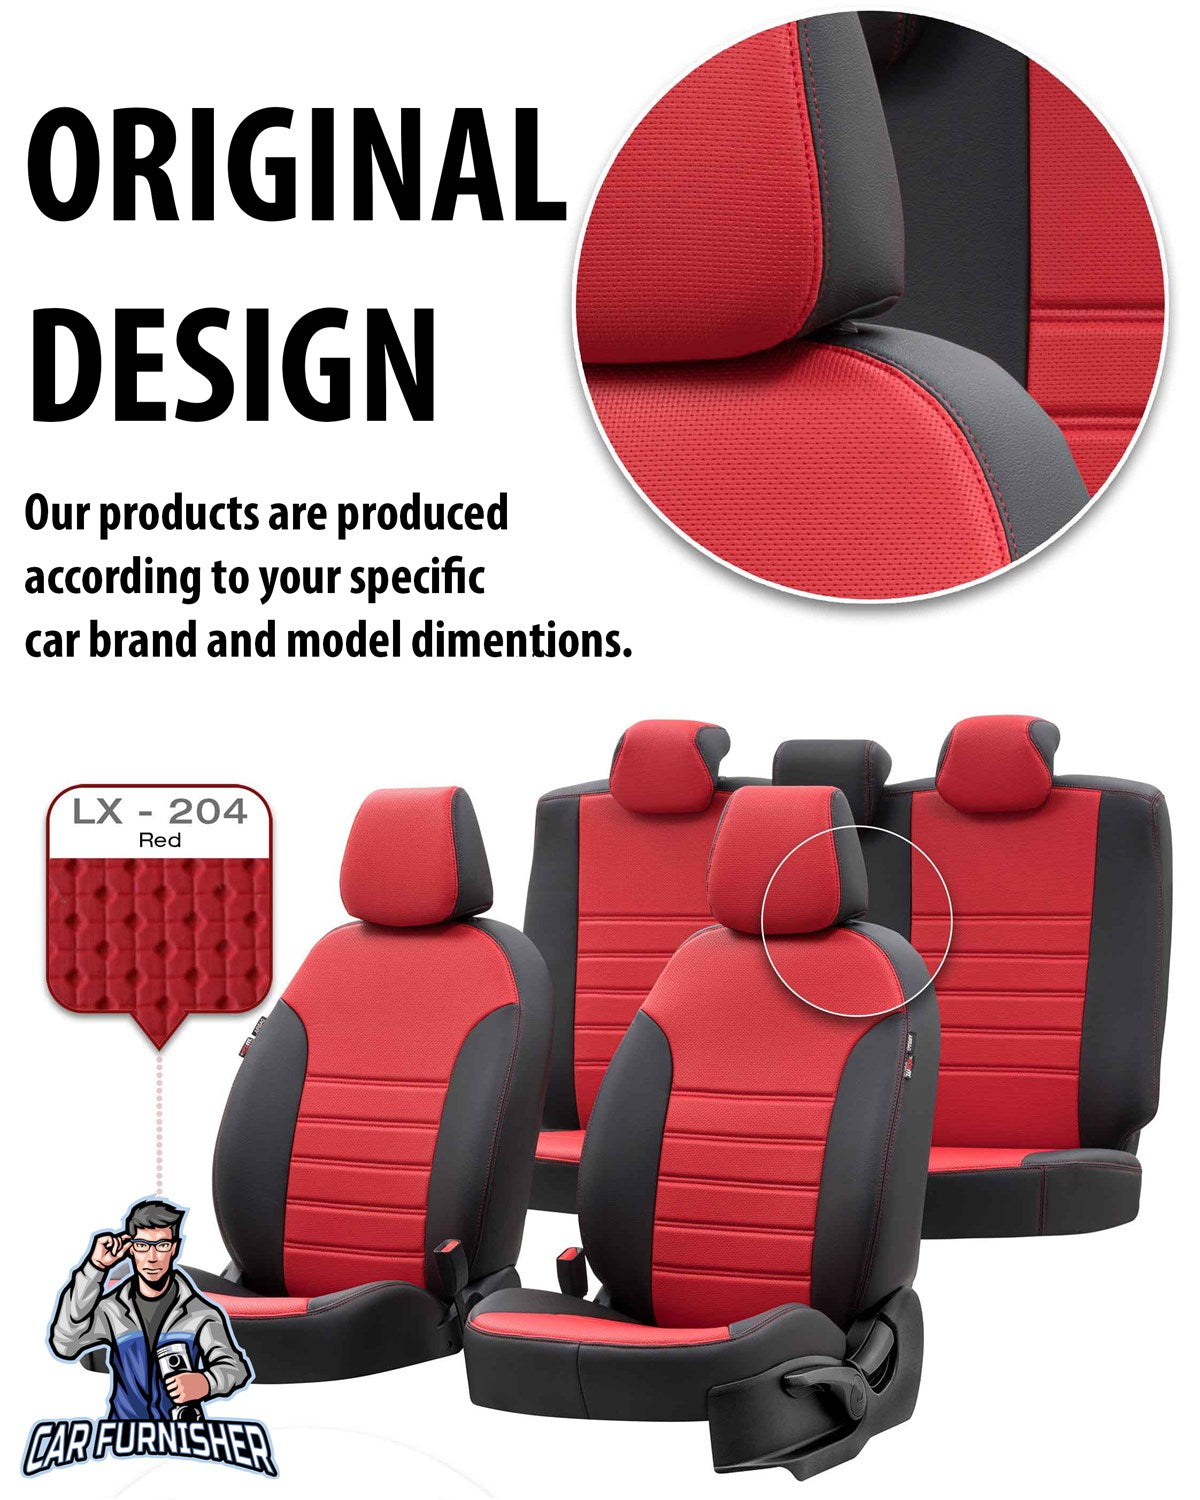 Dacia Dokker Seat Covers New York Leather Design Smoked Leather